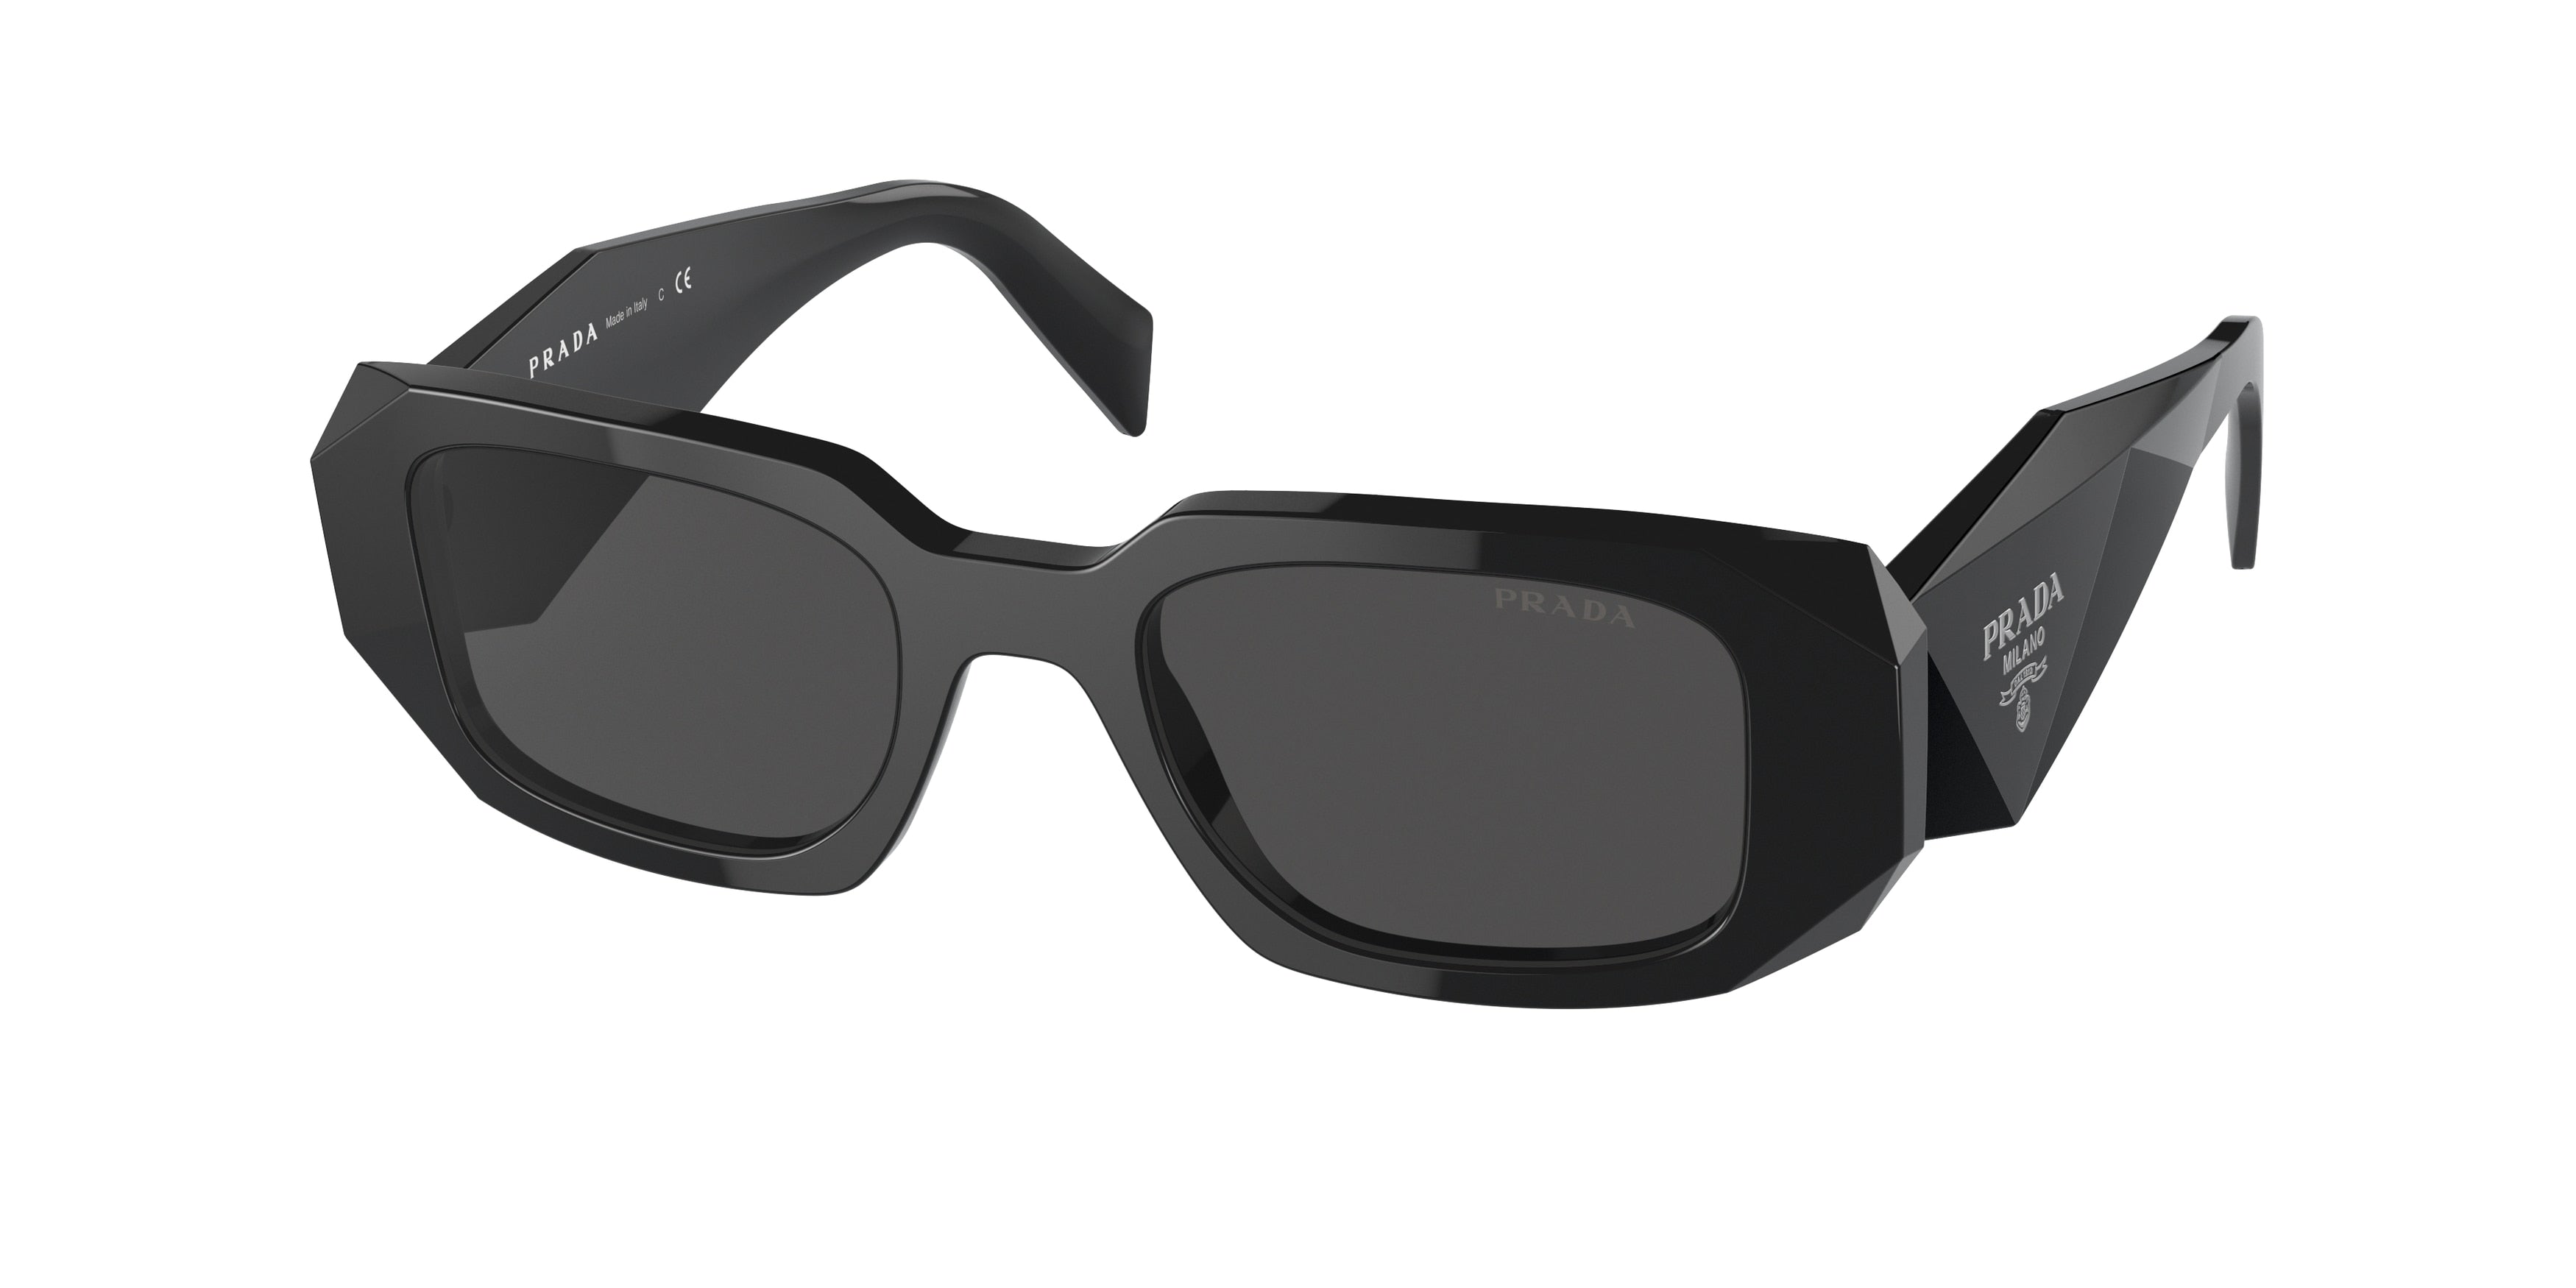 Costa Sunglasses Are Wildly on Sale for Black Friday